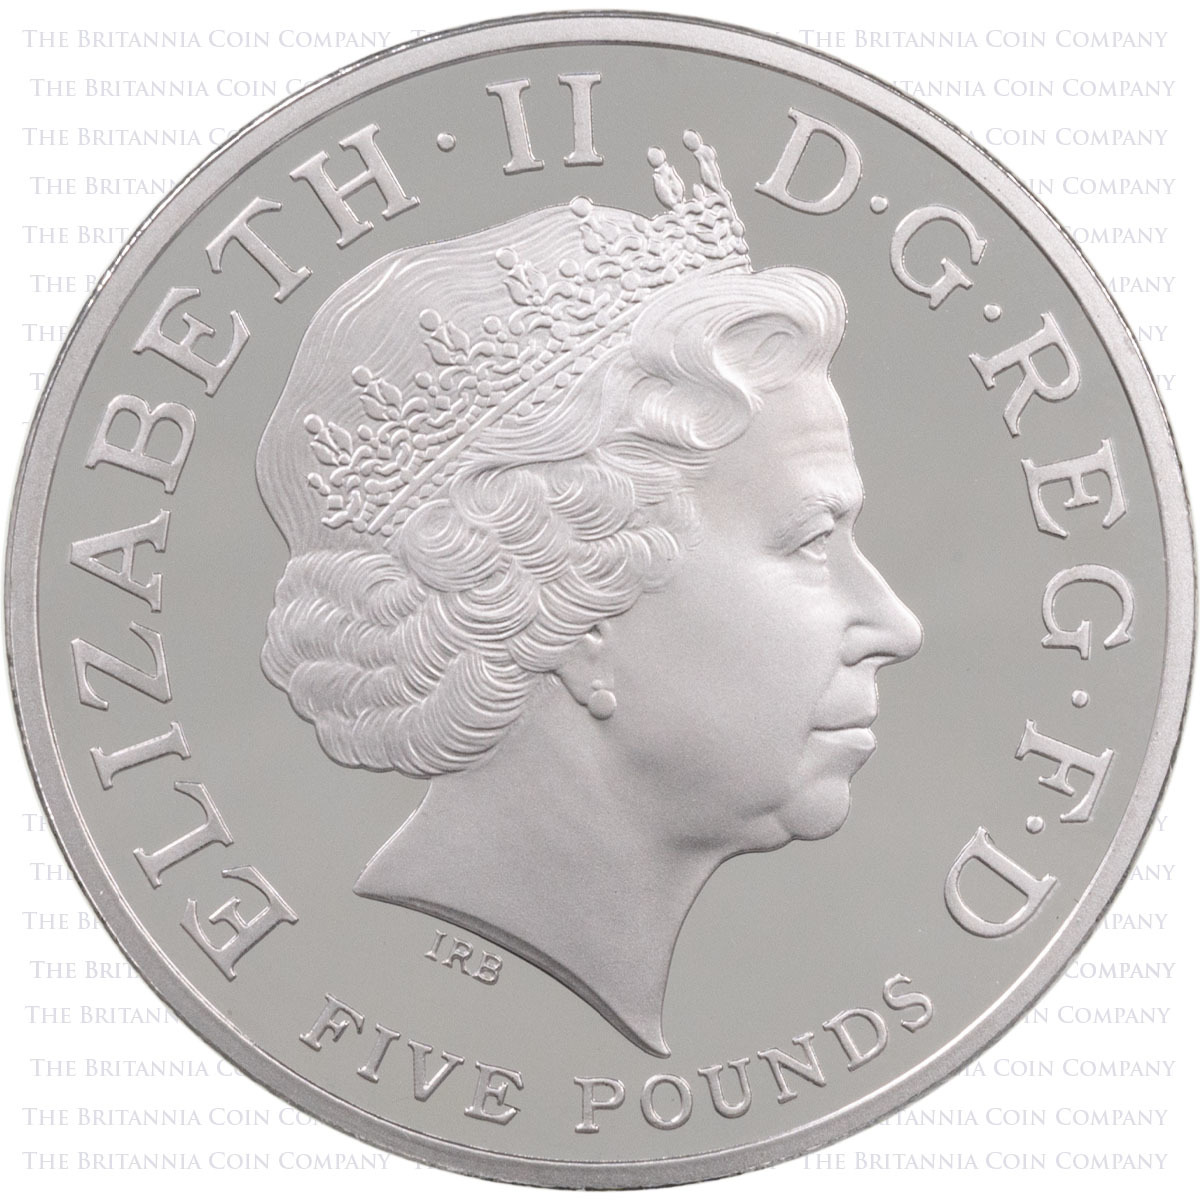 UKPC60PT 2008 Charles Prince Of Wales 60th Birthday Five Pound Crown Piedfort Platinum Proof Coin Obverse